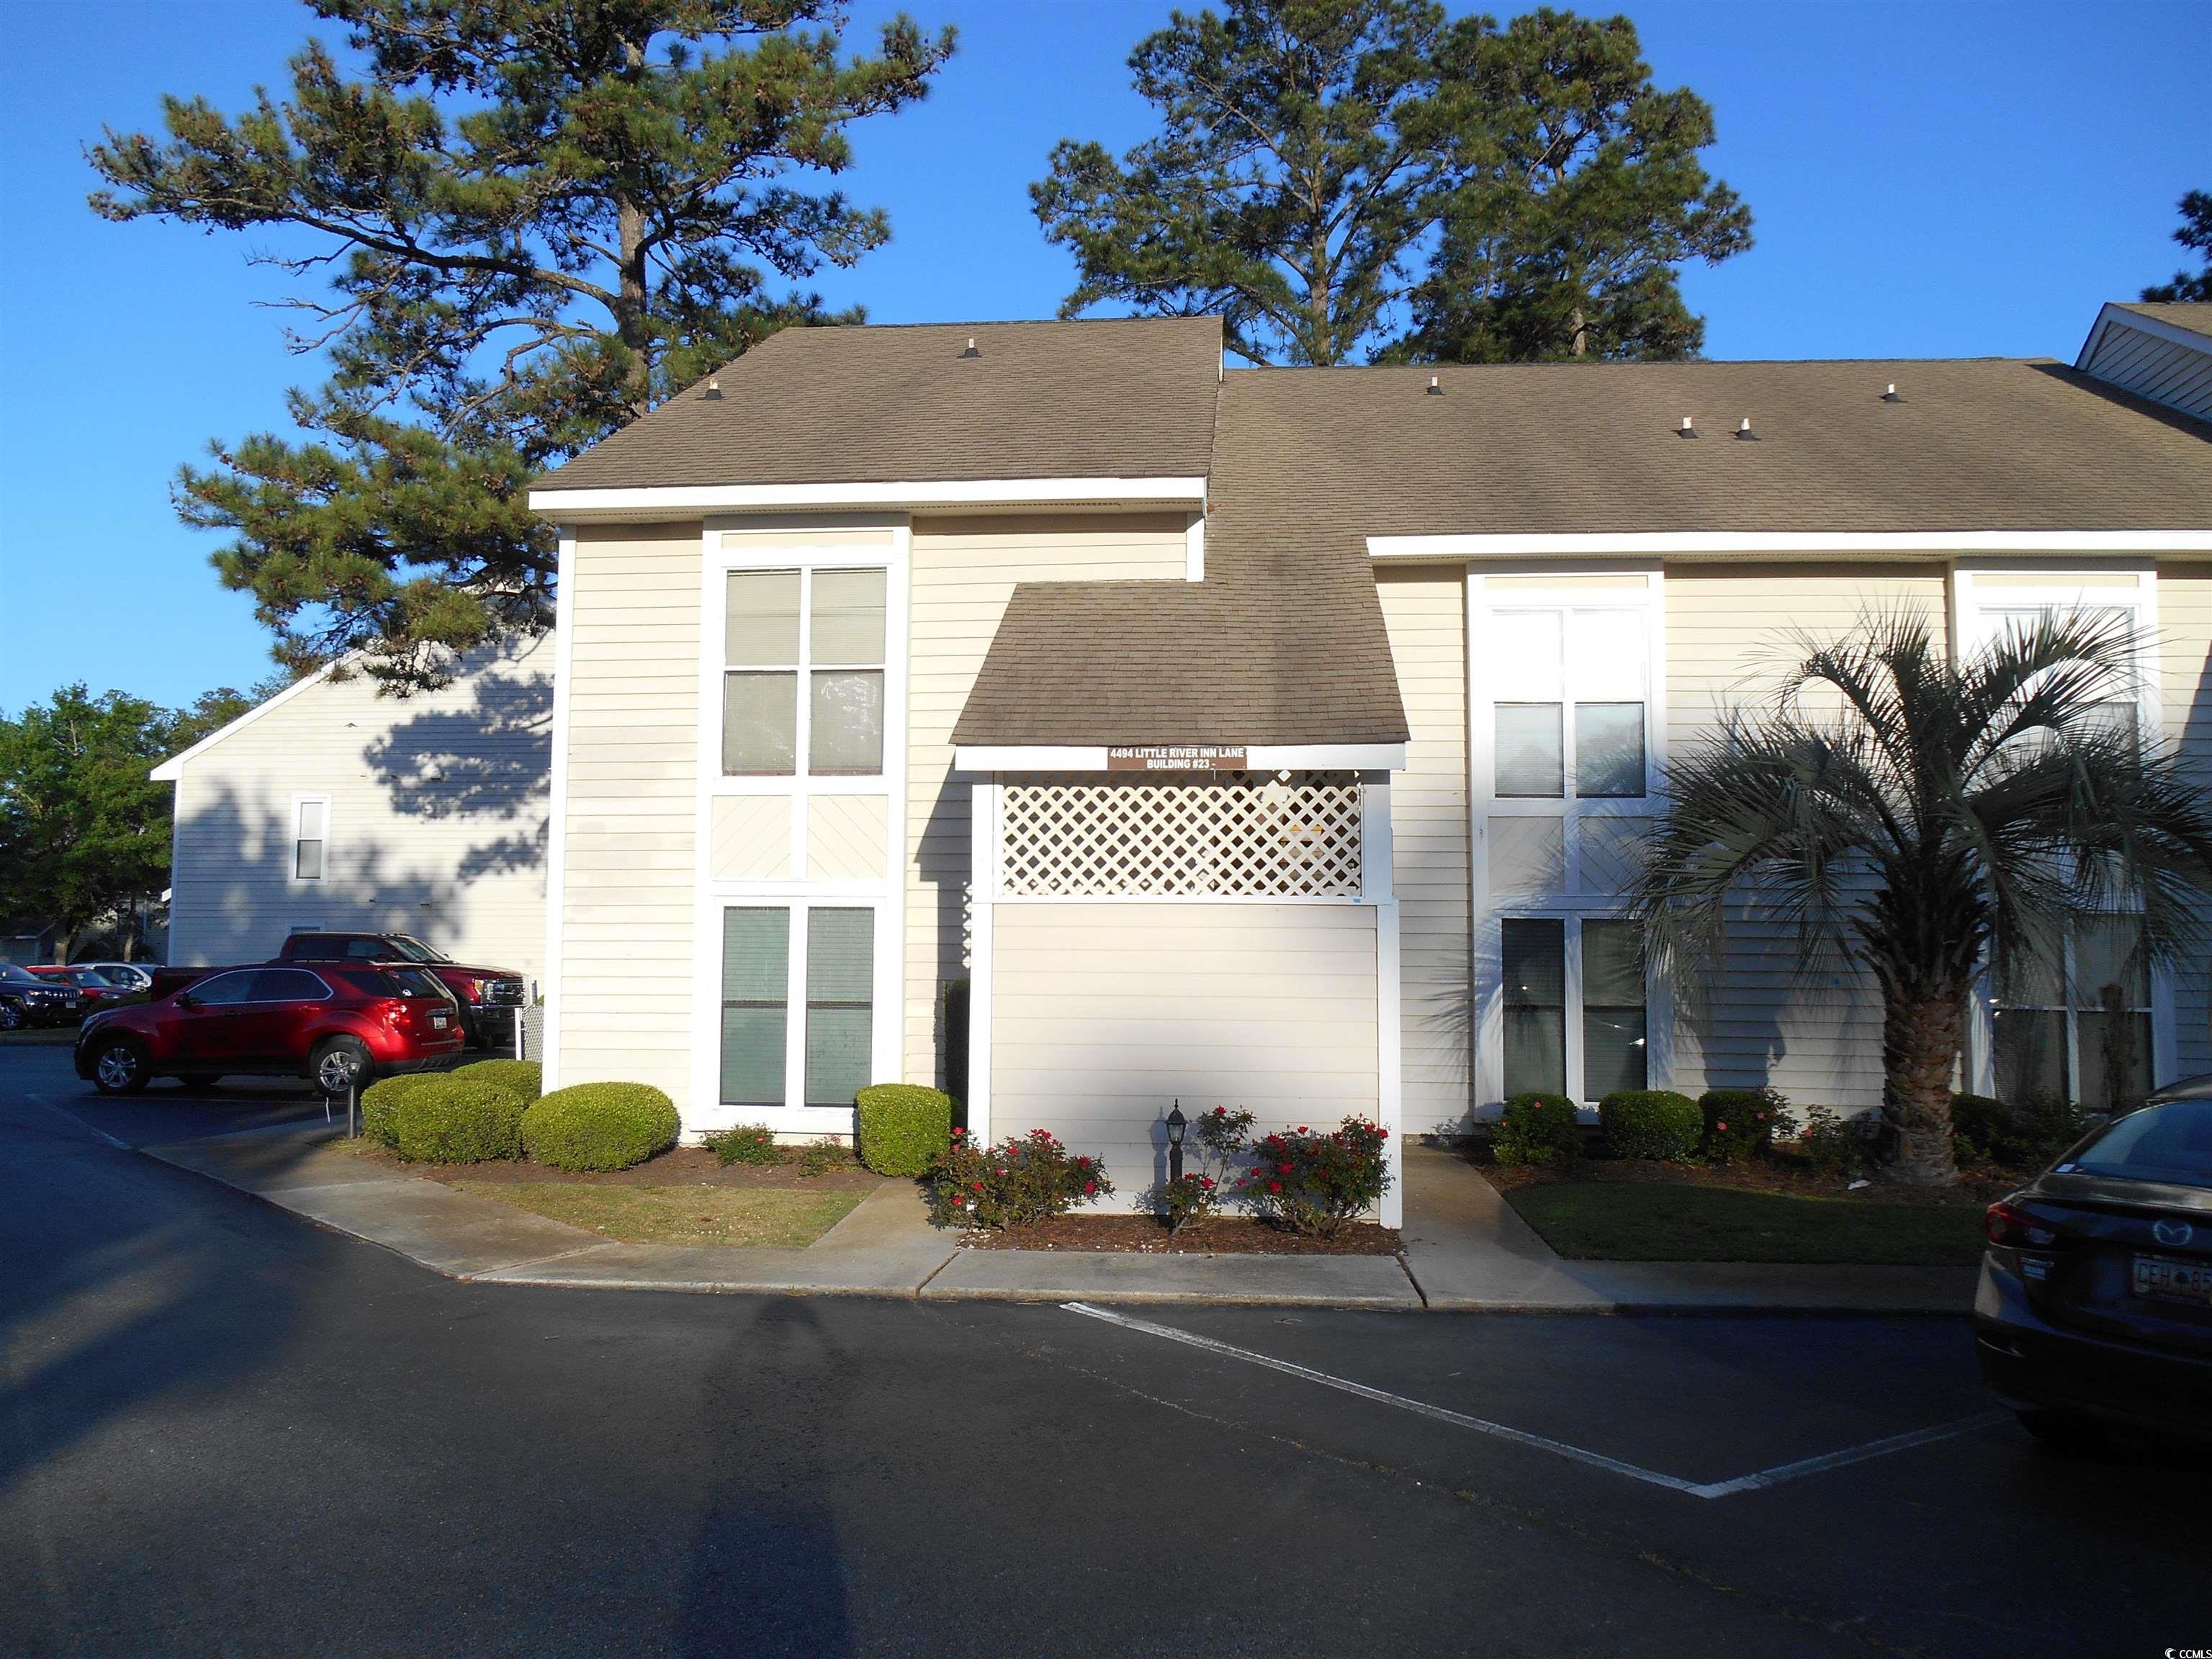 welcome to the quiet and quaint community of little river inn resort. you are conveniently located minutes from shopping, dining, and cherry grove beach. the completely renovated 2nd floor unit is a 2 bedroom 2 bath condo, with all new lvp flooring, open kitchen floor plan and vaulted ceilings. loft-style master bedroom on the second level that features a balcony with a secluded wood view.  enjoy the amenities of this community that included 2 pools, tennis courts, and a playground area, ensuring endless entertainment for all ages. 2 assigned parking spots.  schedule your showing today!